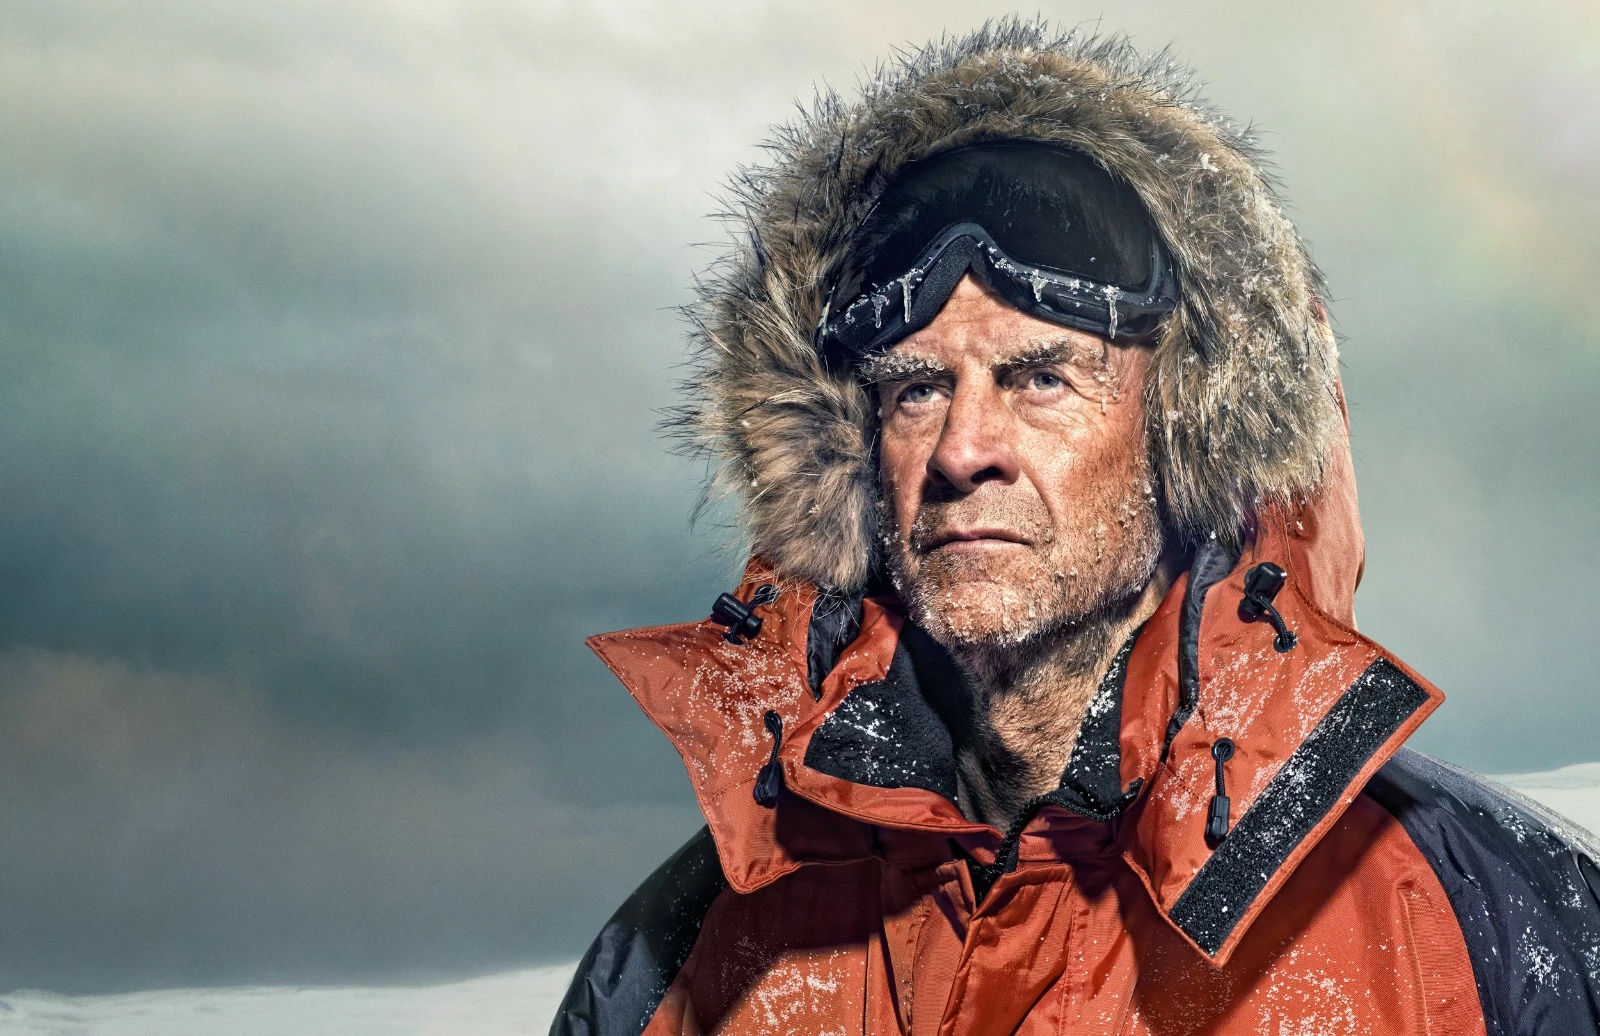 Sir Ranulph Fiennes is speaking at the event.